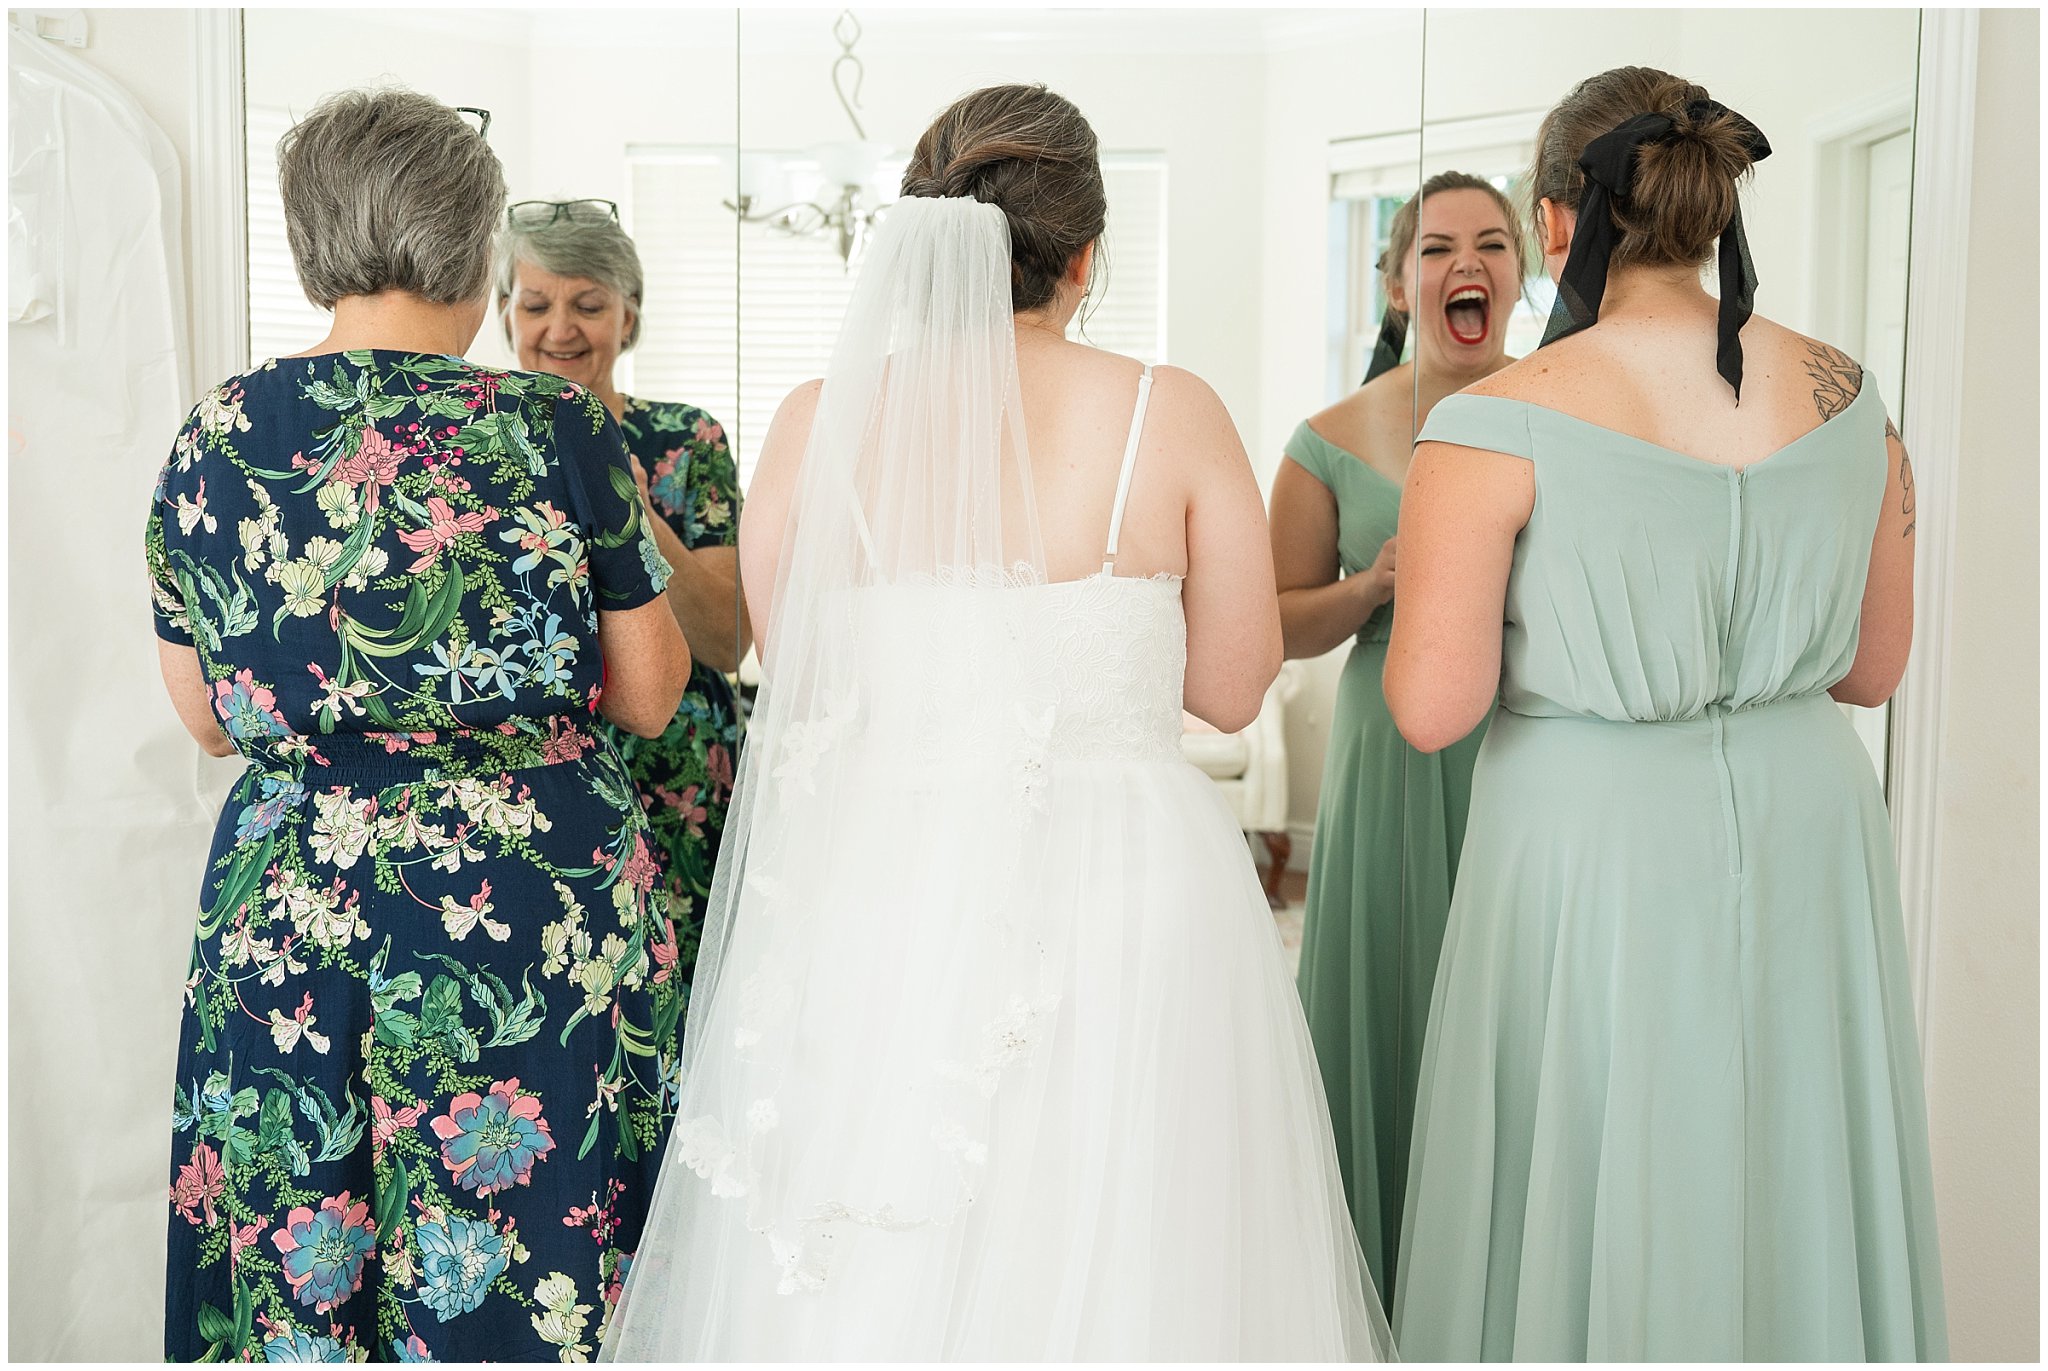 Bride getting ready with bridesmaid and mom | Intimate Utah Summer Garden Wedding | Jessie and Dallin Photography